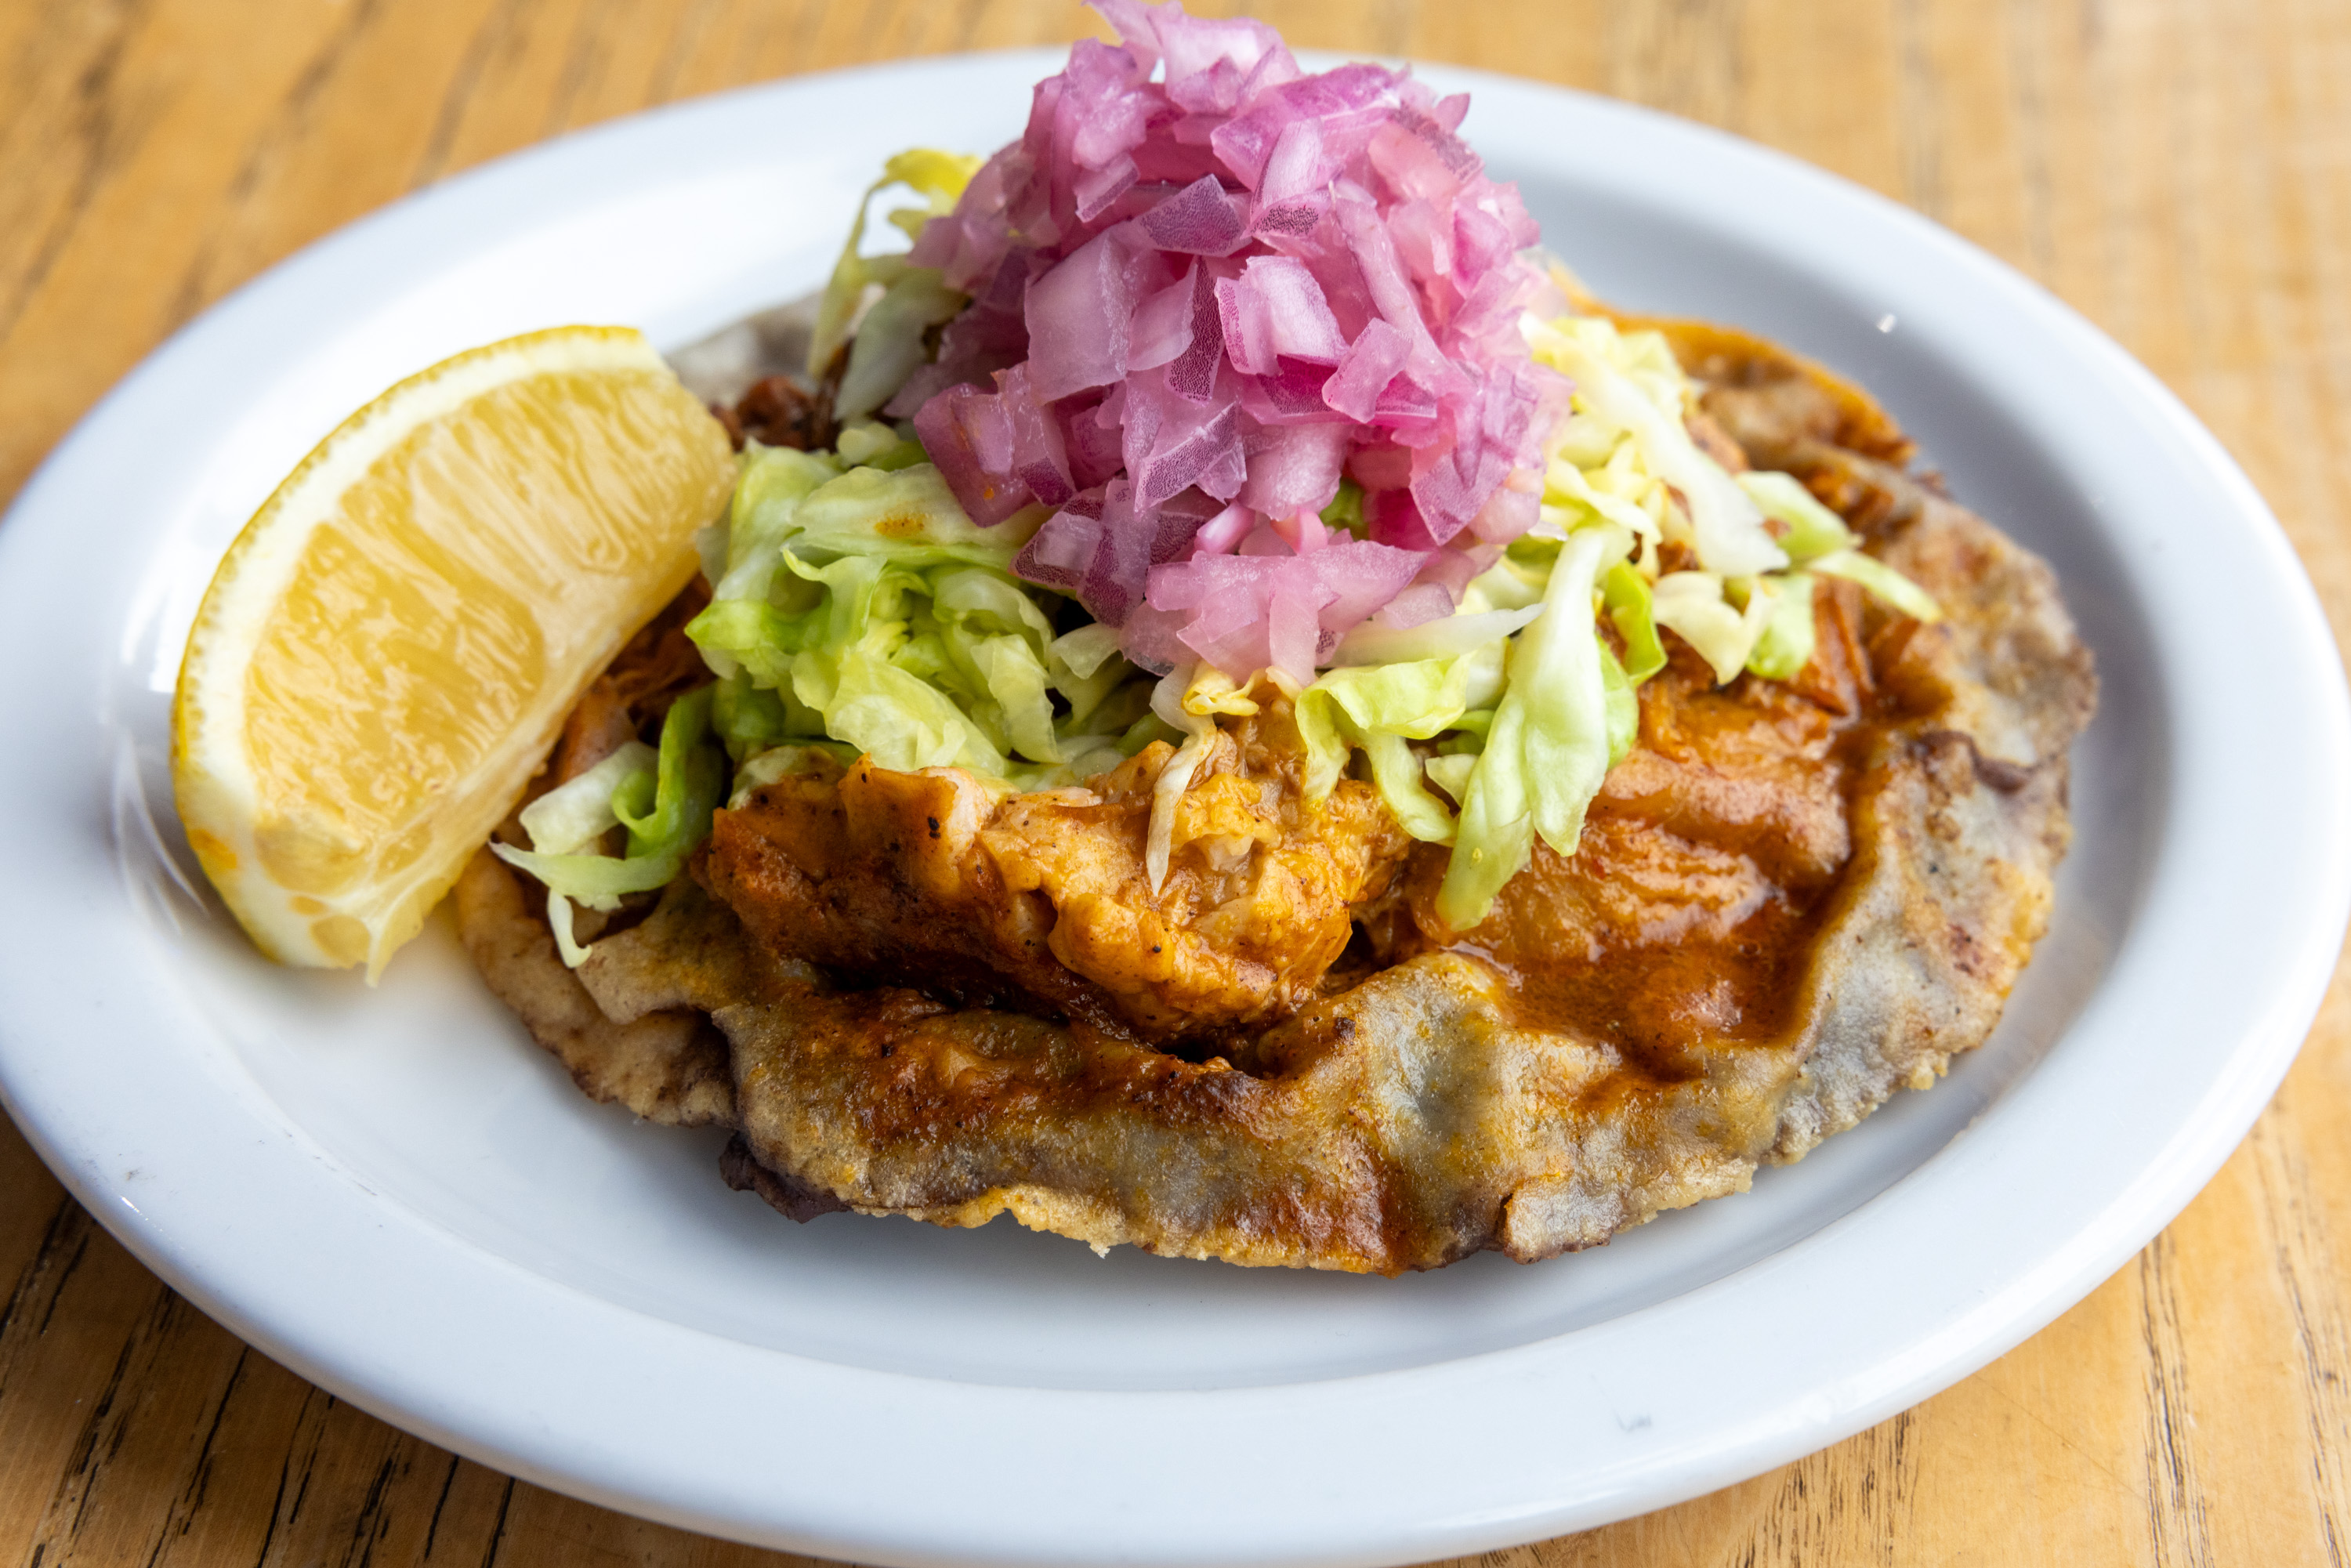 A taco with chicken, lettuce, pickled onions, and a lemon wedge on a white plate.